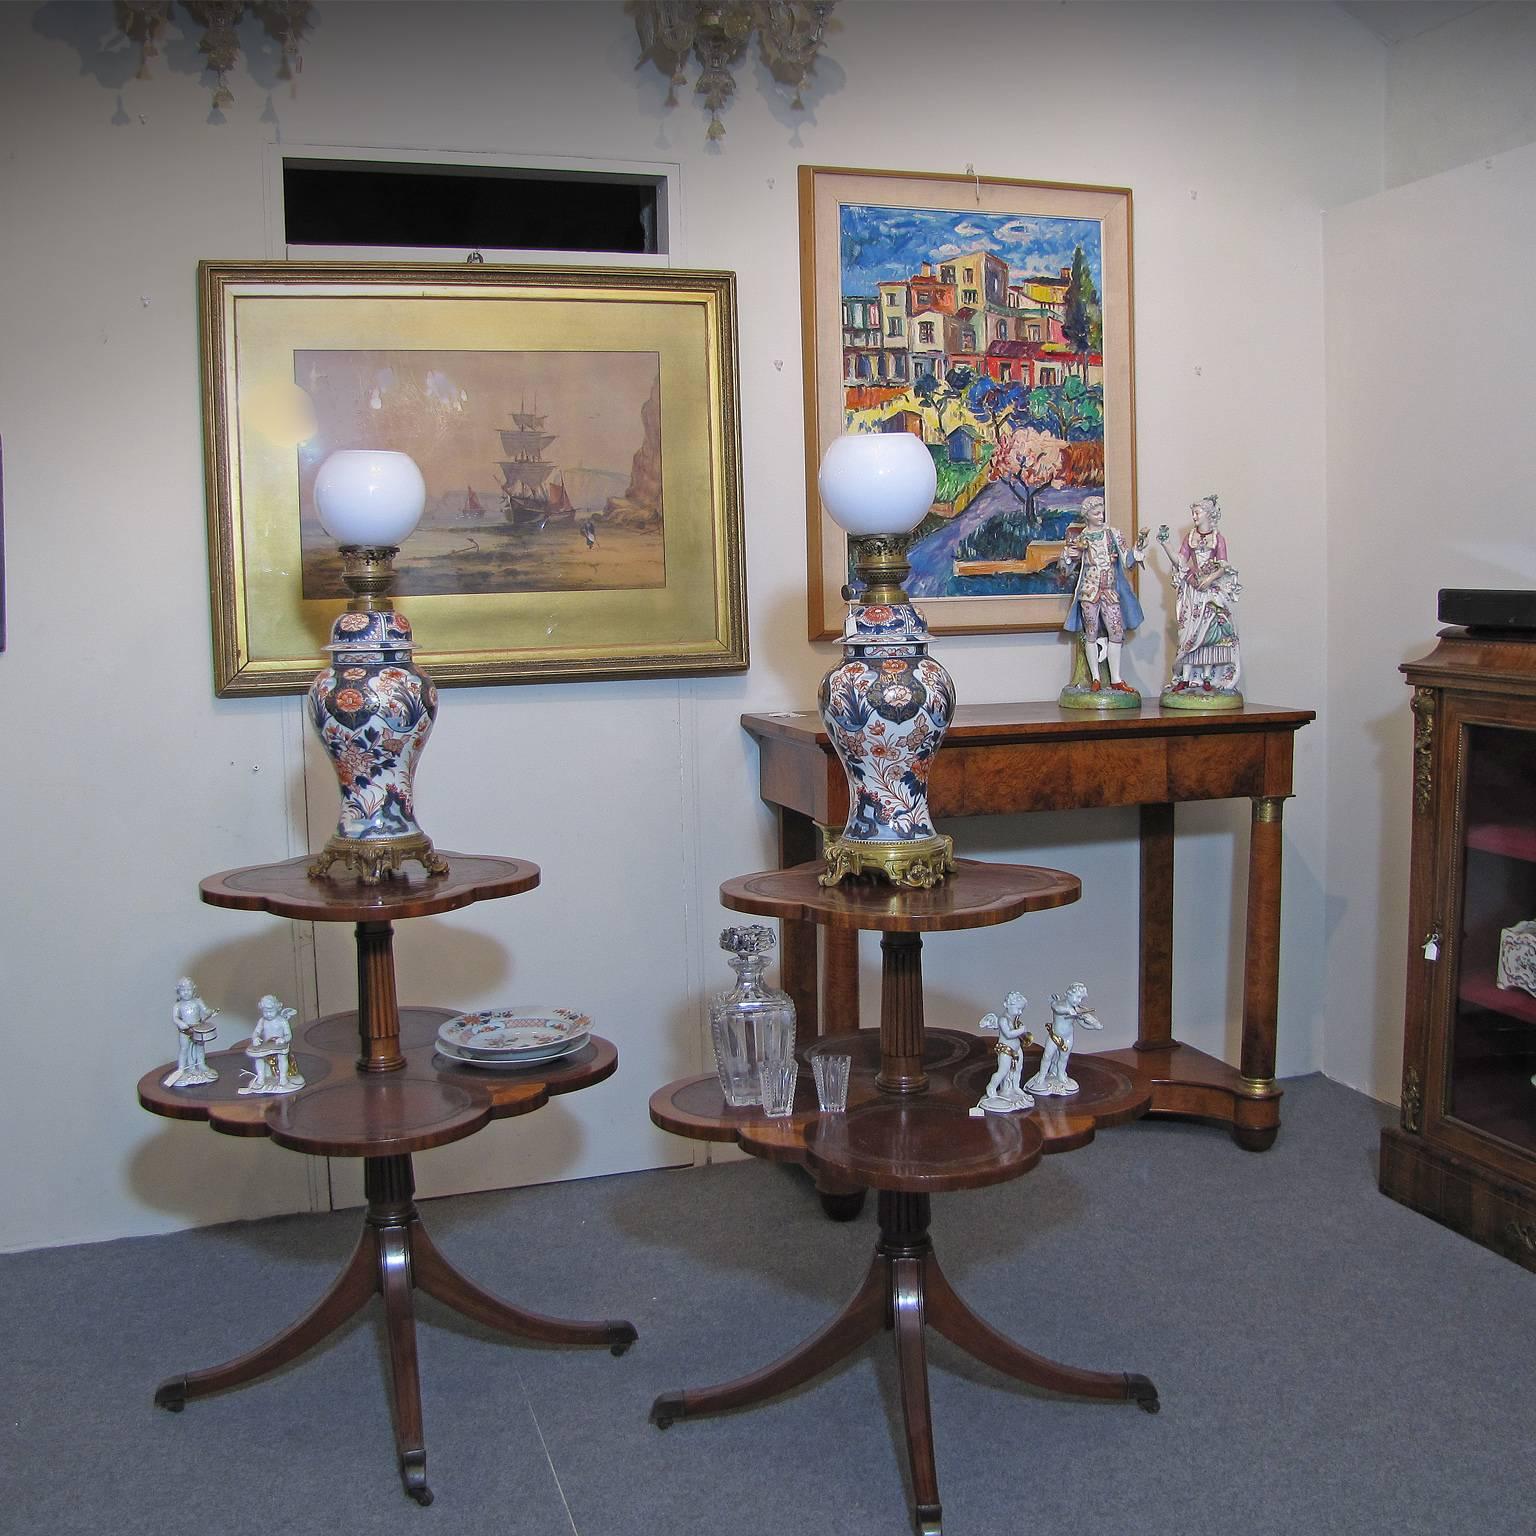 Late 19th Century 19th Century Two-Tier Side Tables with Saber Legs by J.B. Van Sciver Co. For Sale